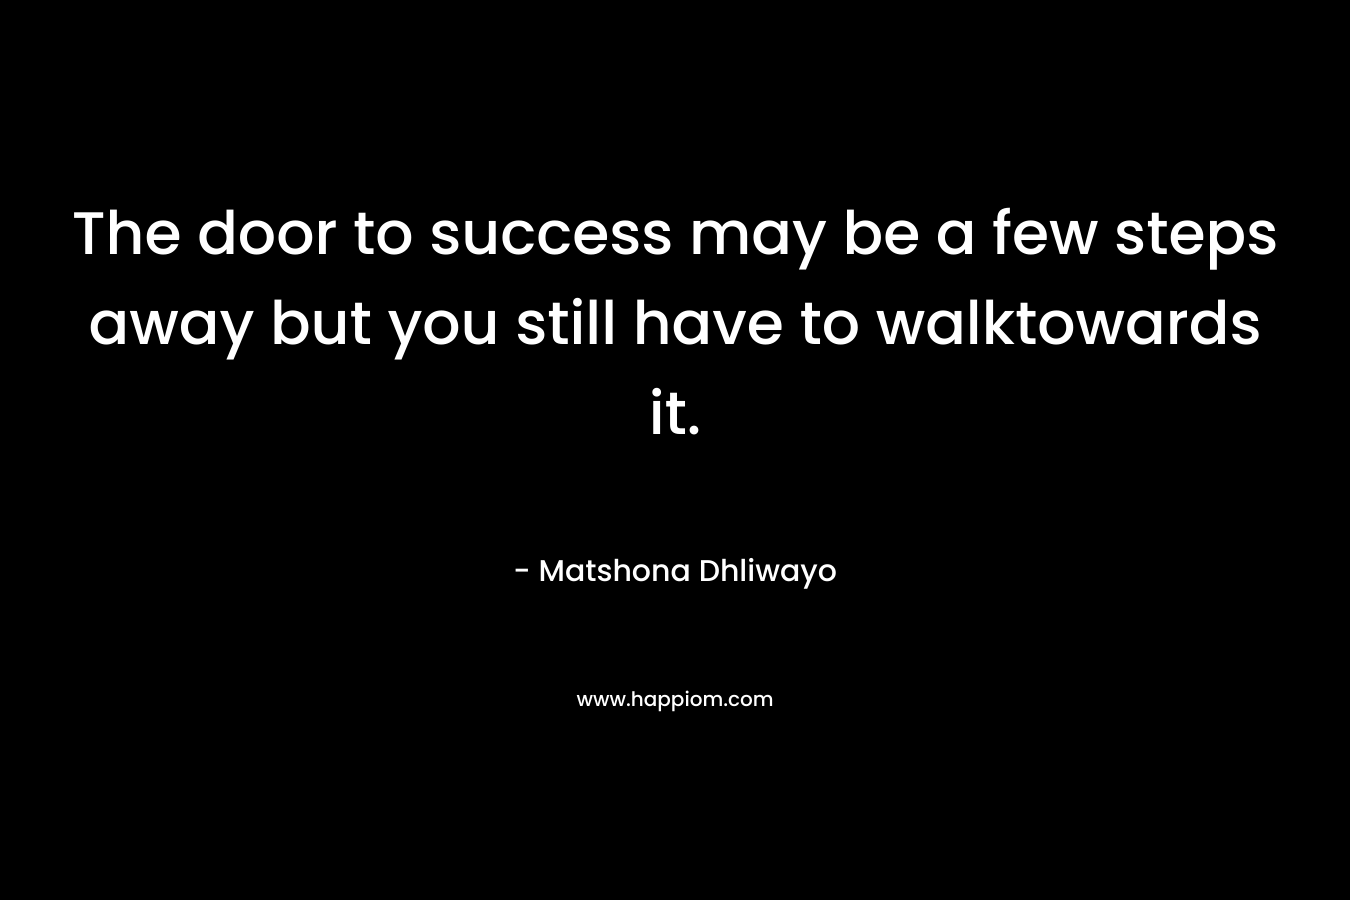 The door to success may be a few steps away but you still have to walktowards it.